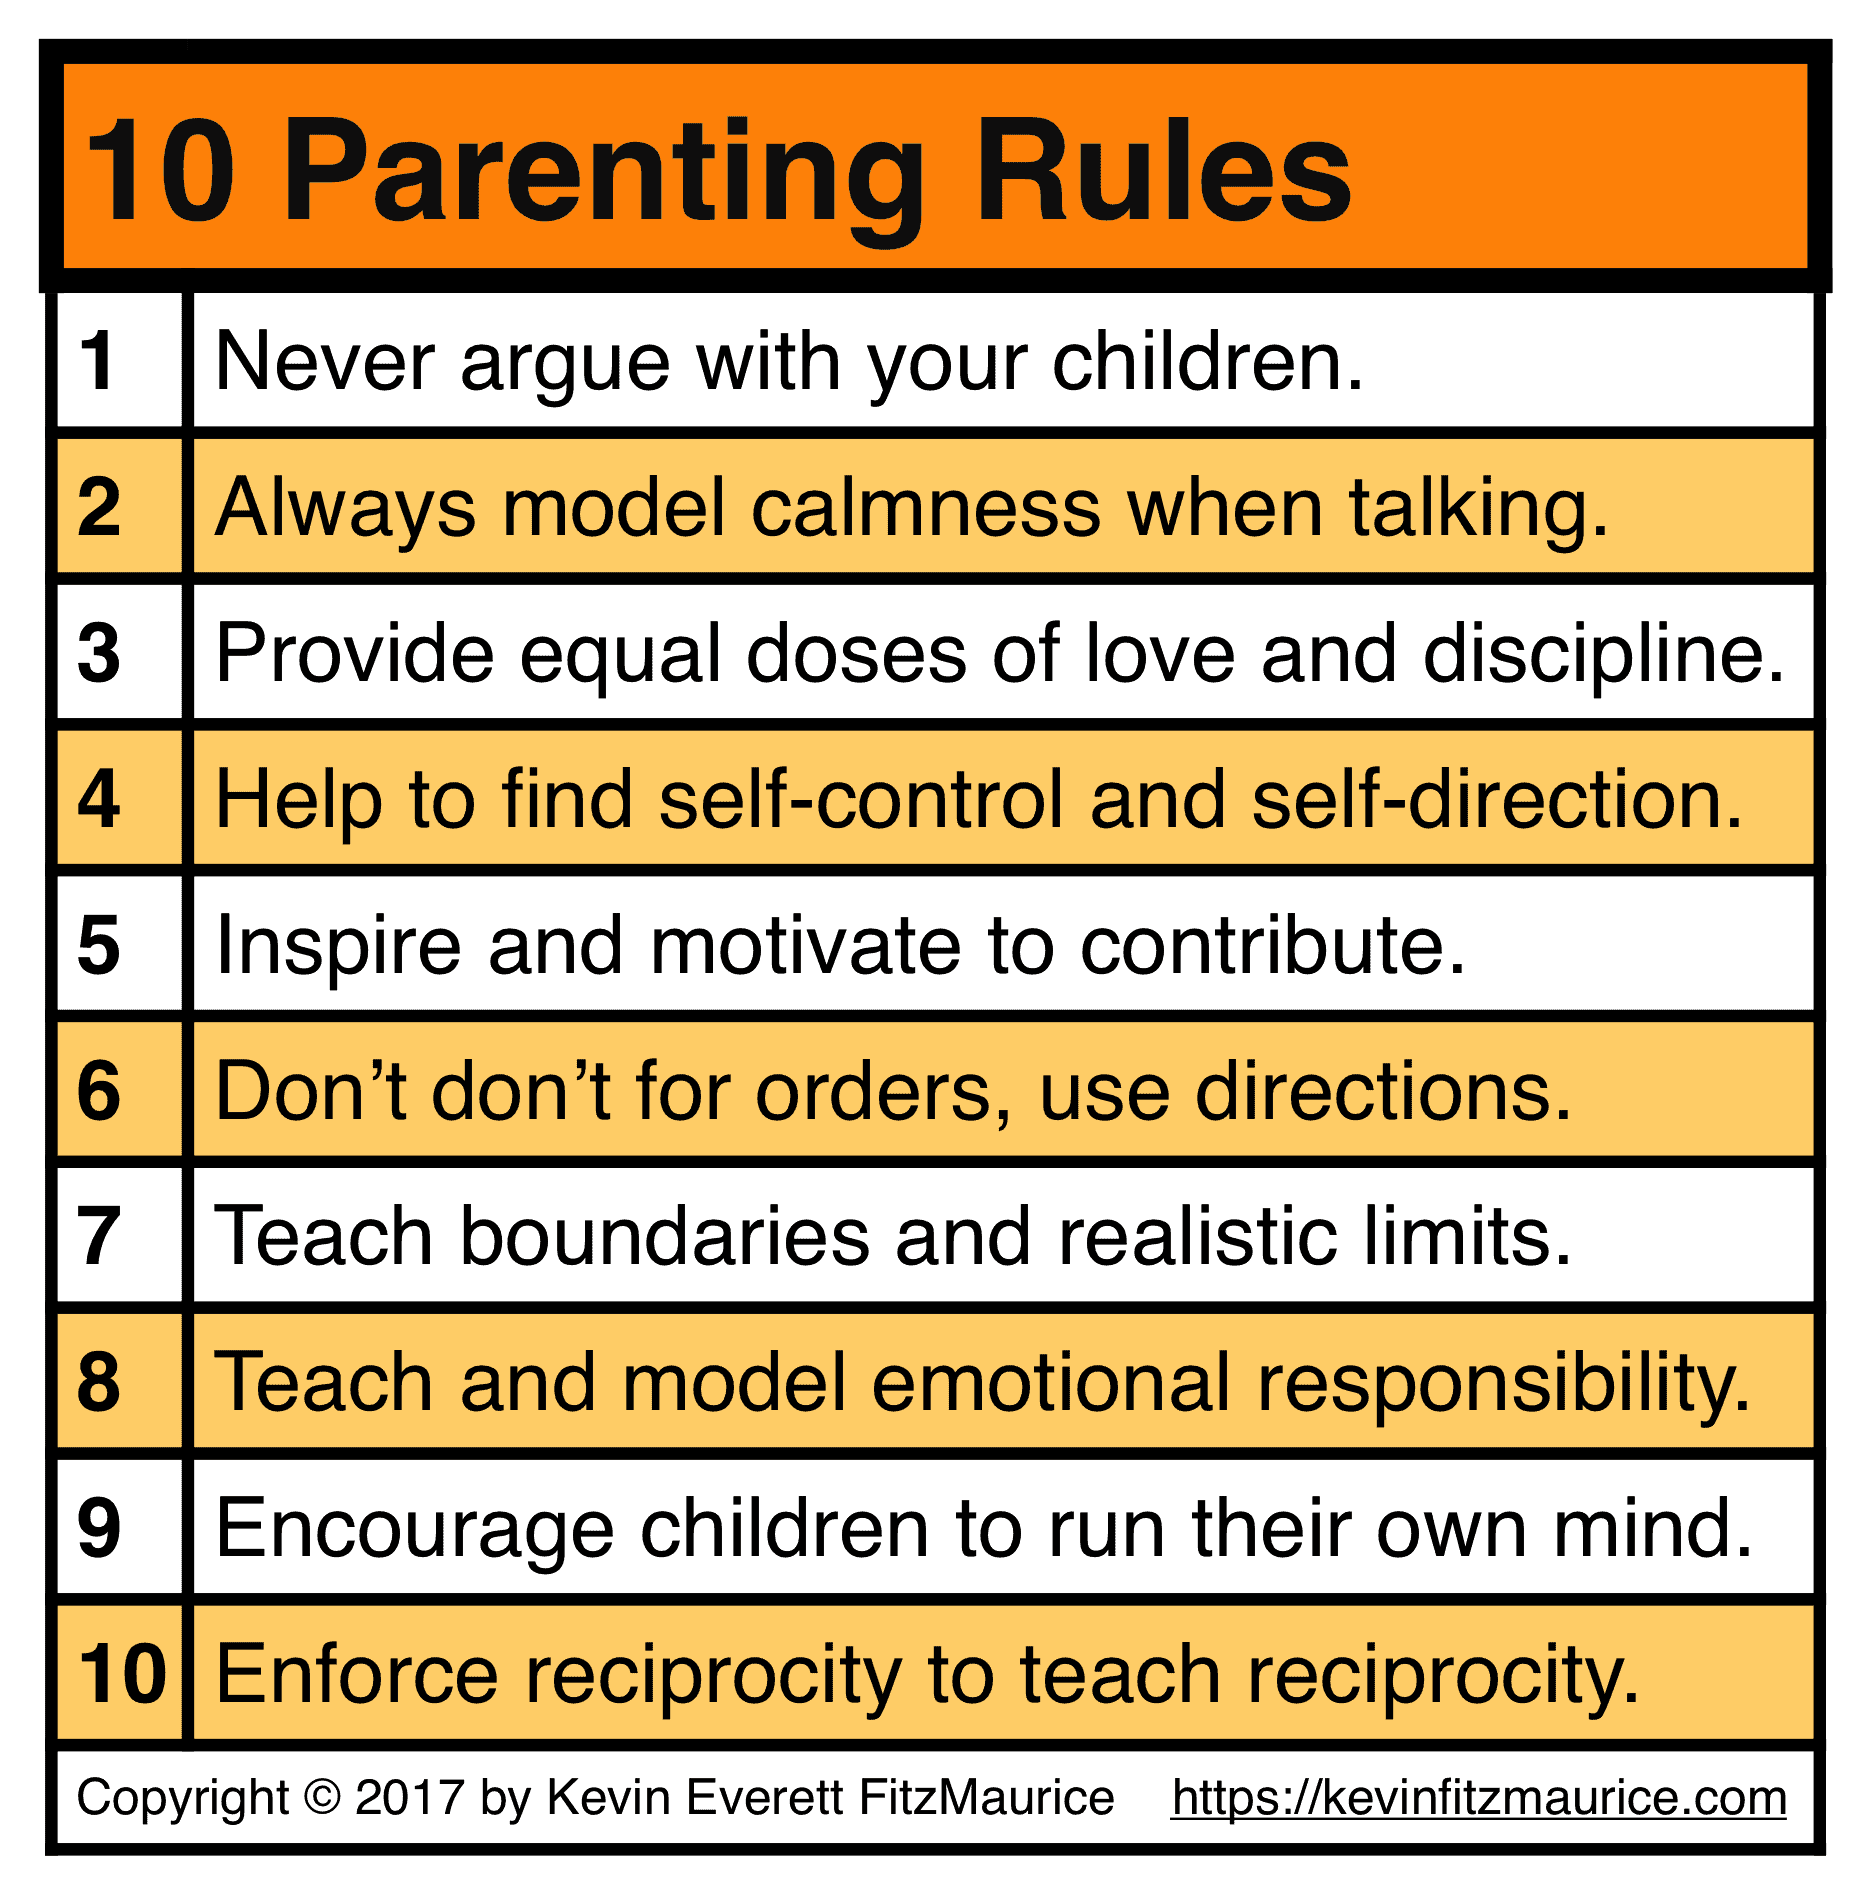 10 Parenting Rules to Learn & Practice